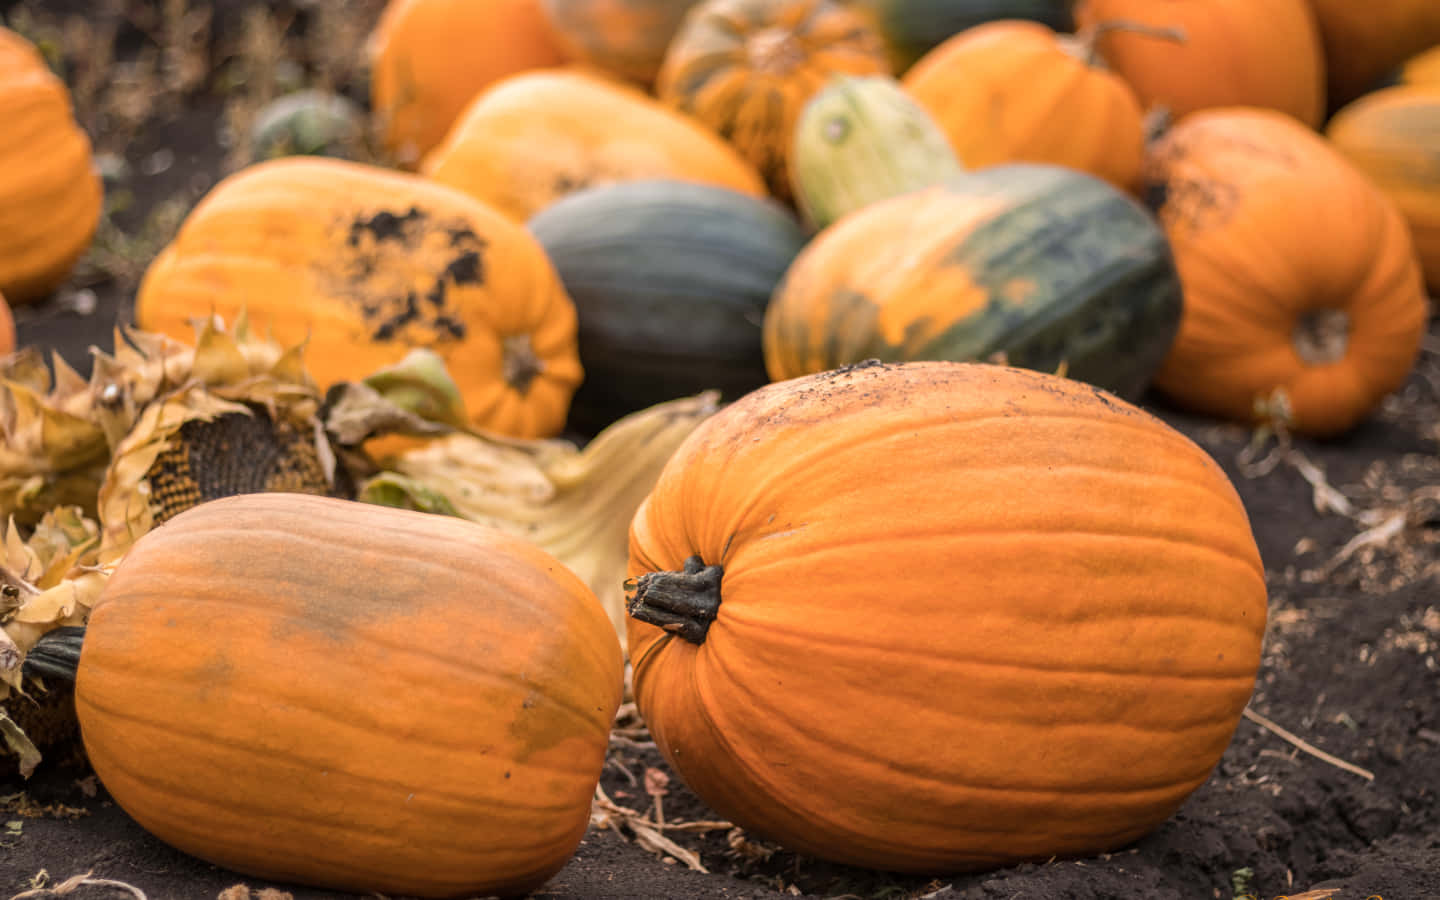 Caption: Autumn pumpkins surrounded by colorful fall foliage